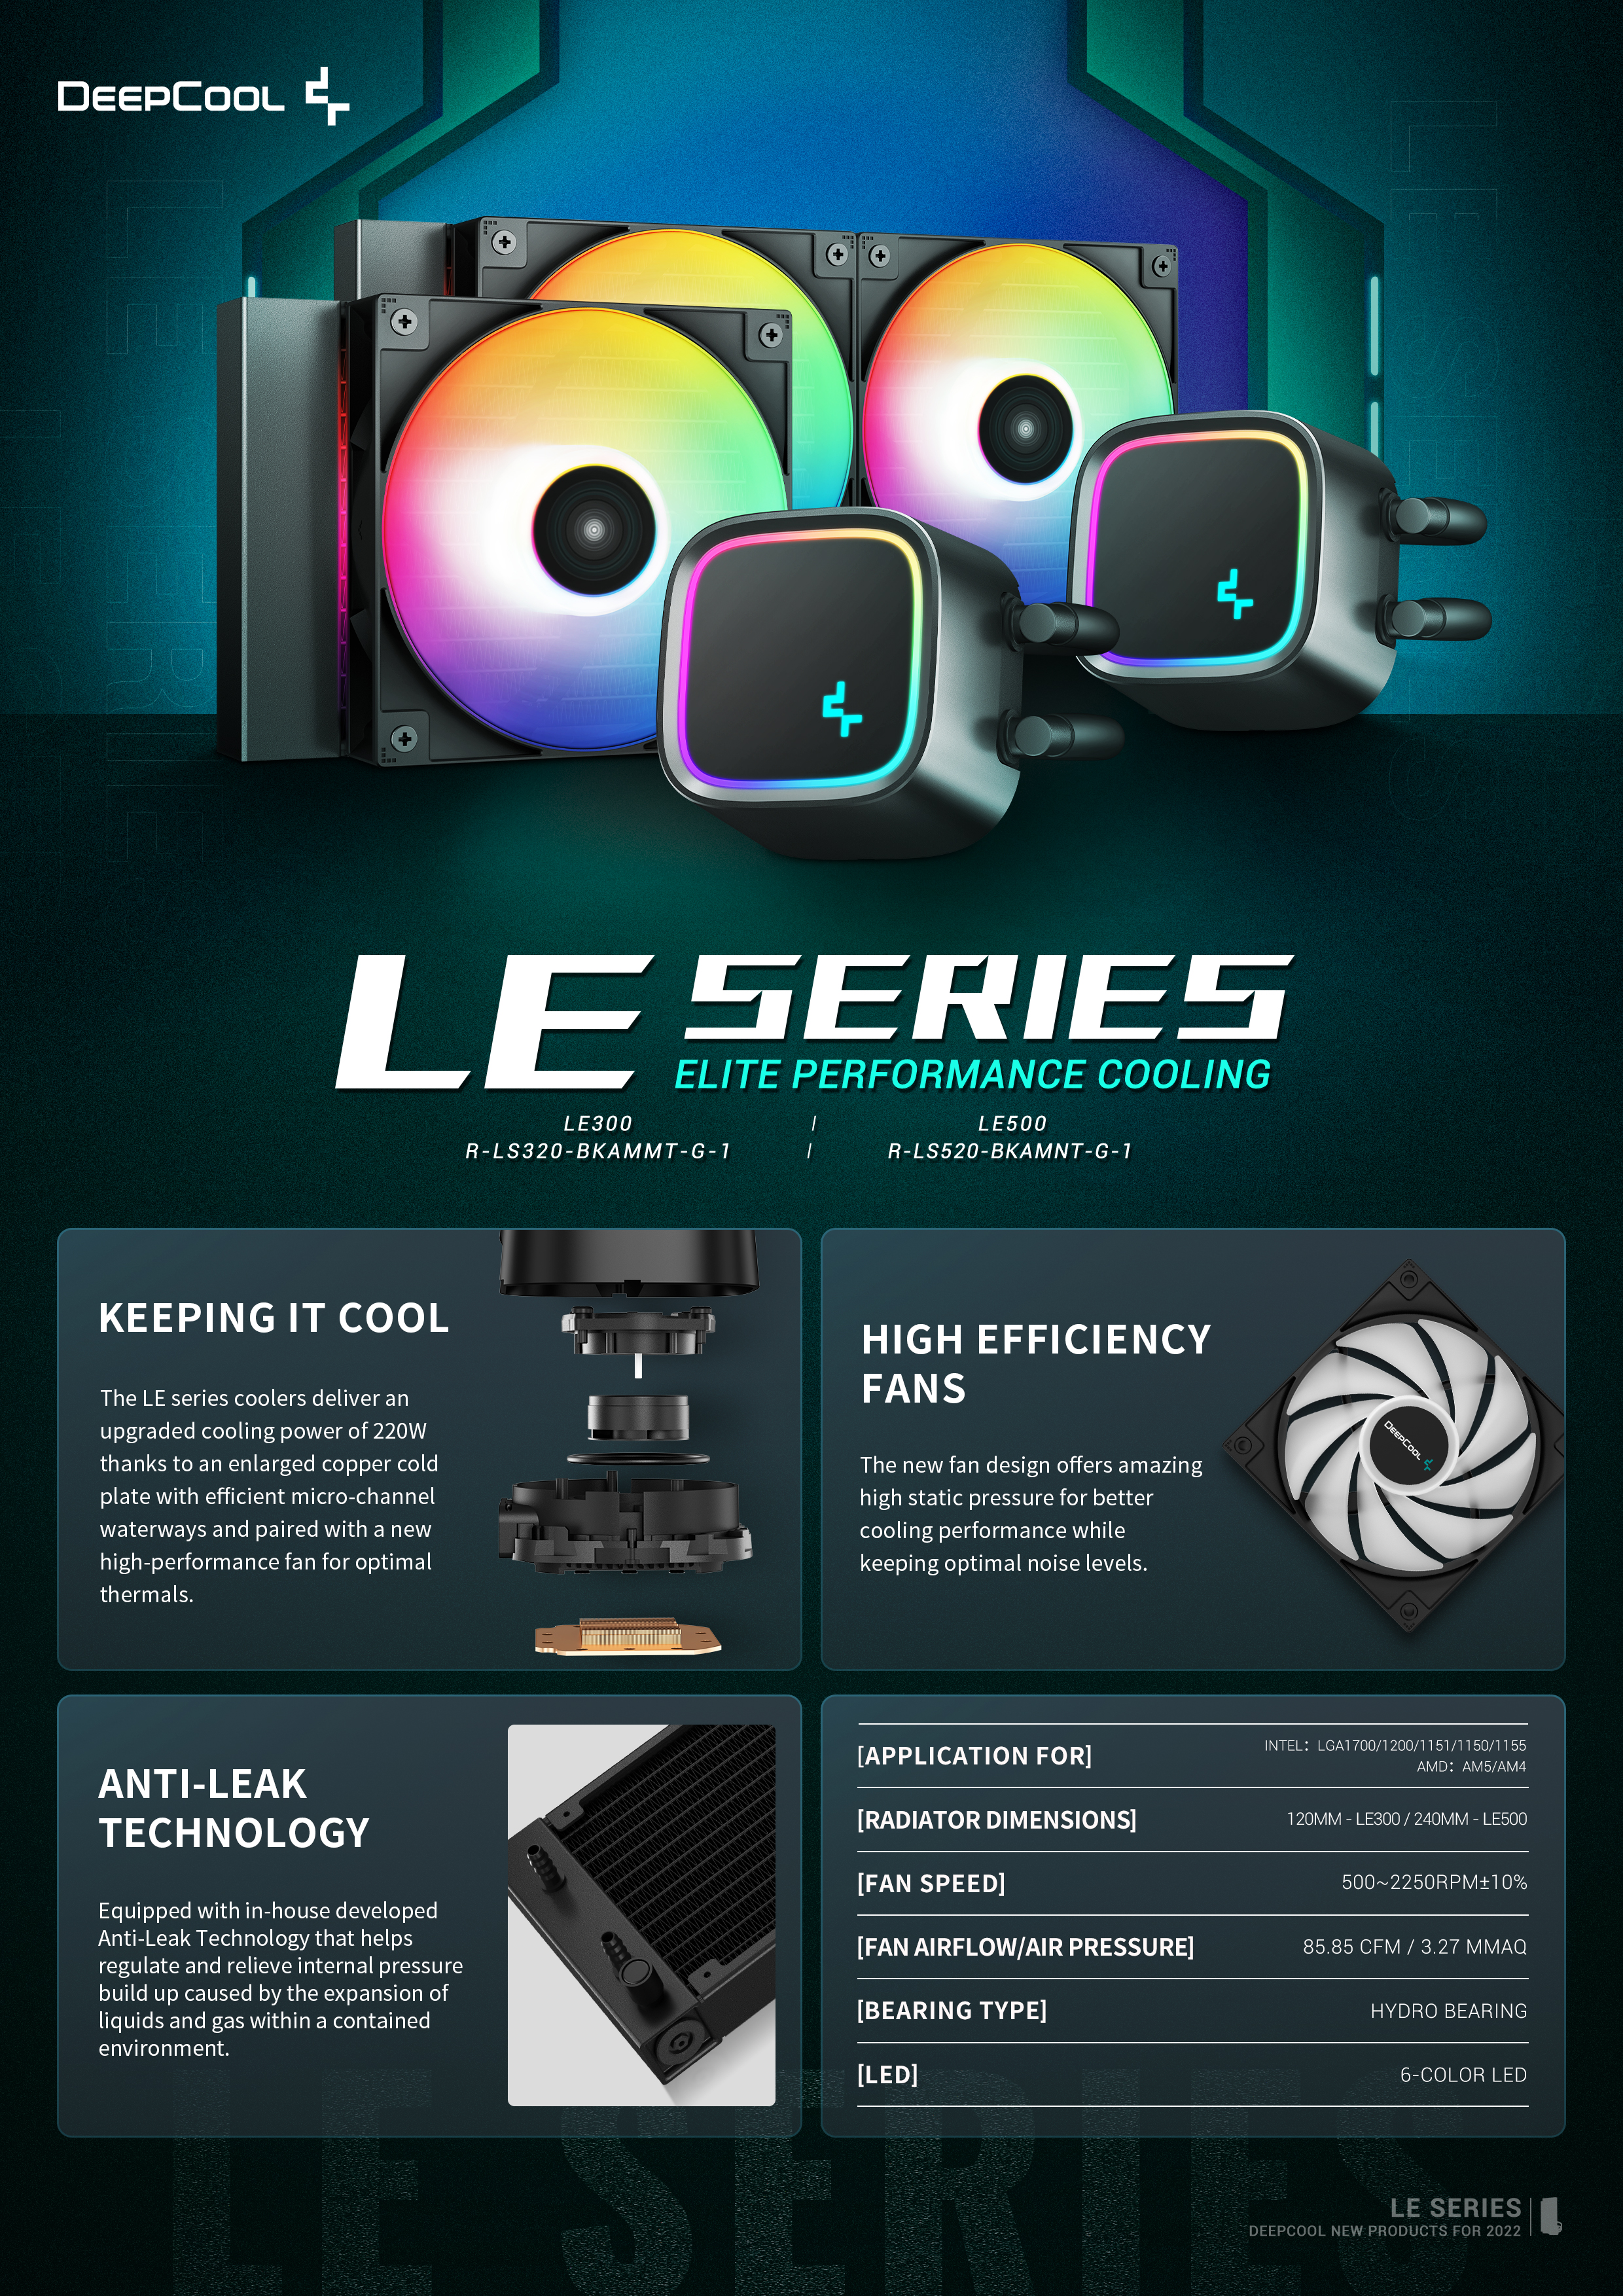 A large marketing image providing additional information about the product DeepCool LE300 LED 120mm AIO CPU Cooler - Additional alt info not provided